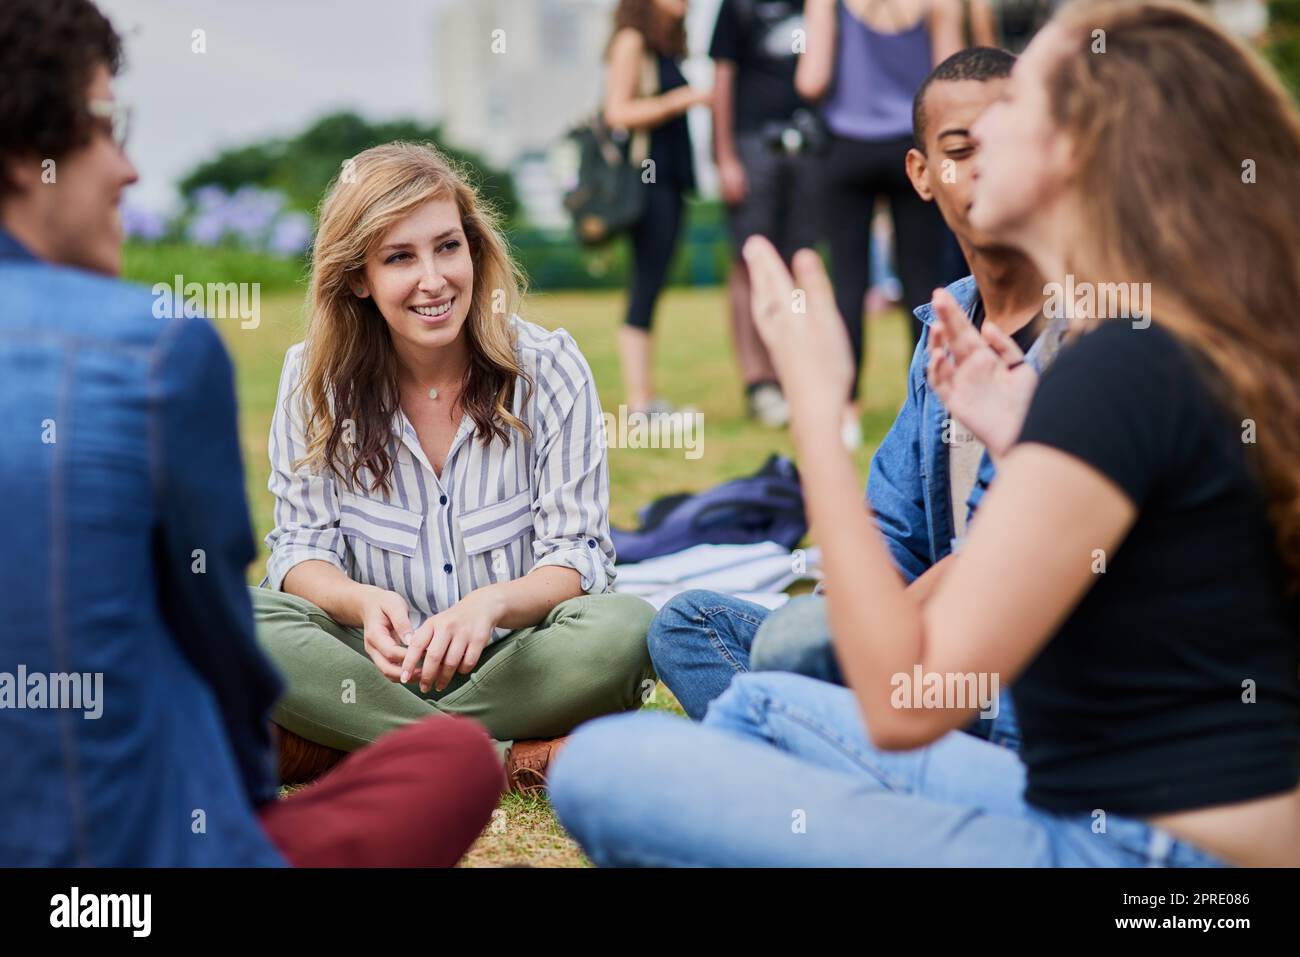 Chatting about life. a group of young students studying together while being seated in a park outside during the day. Stock Photo